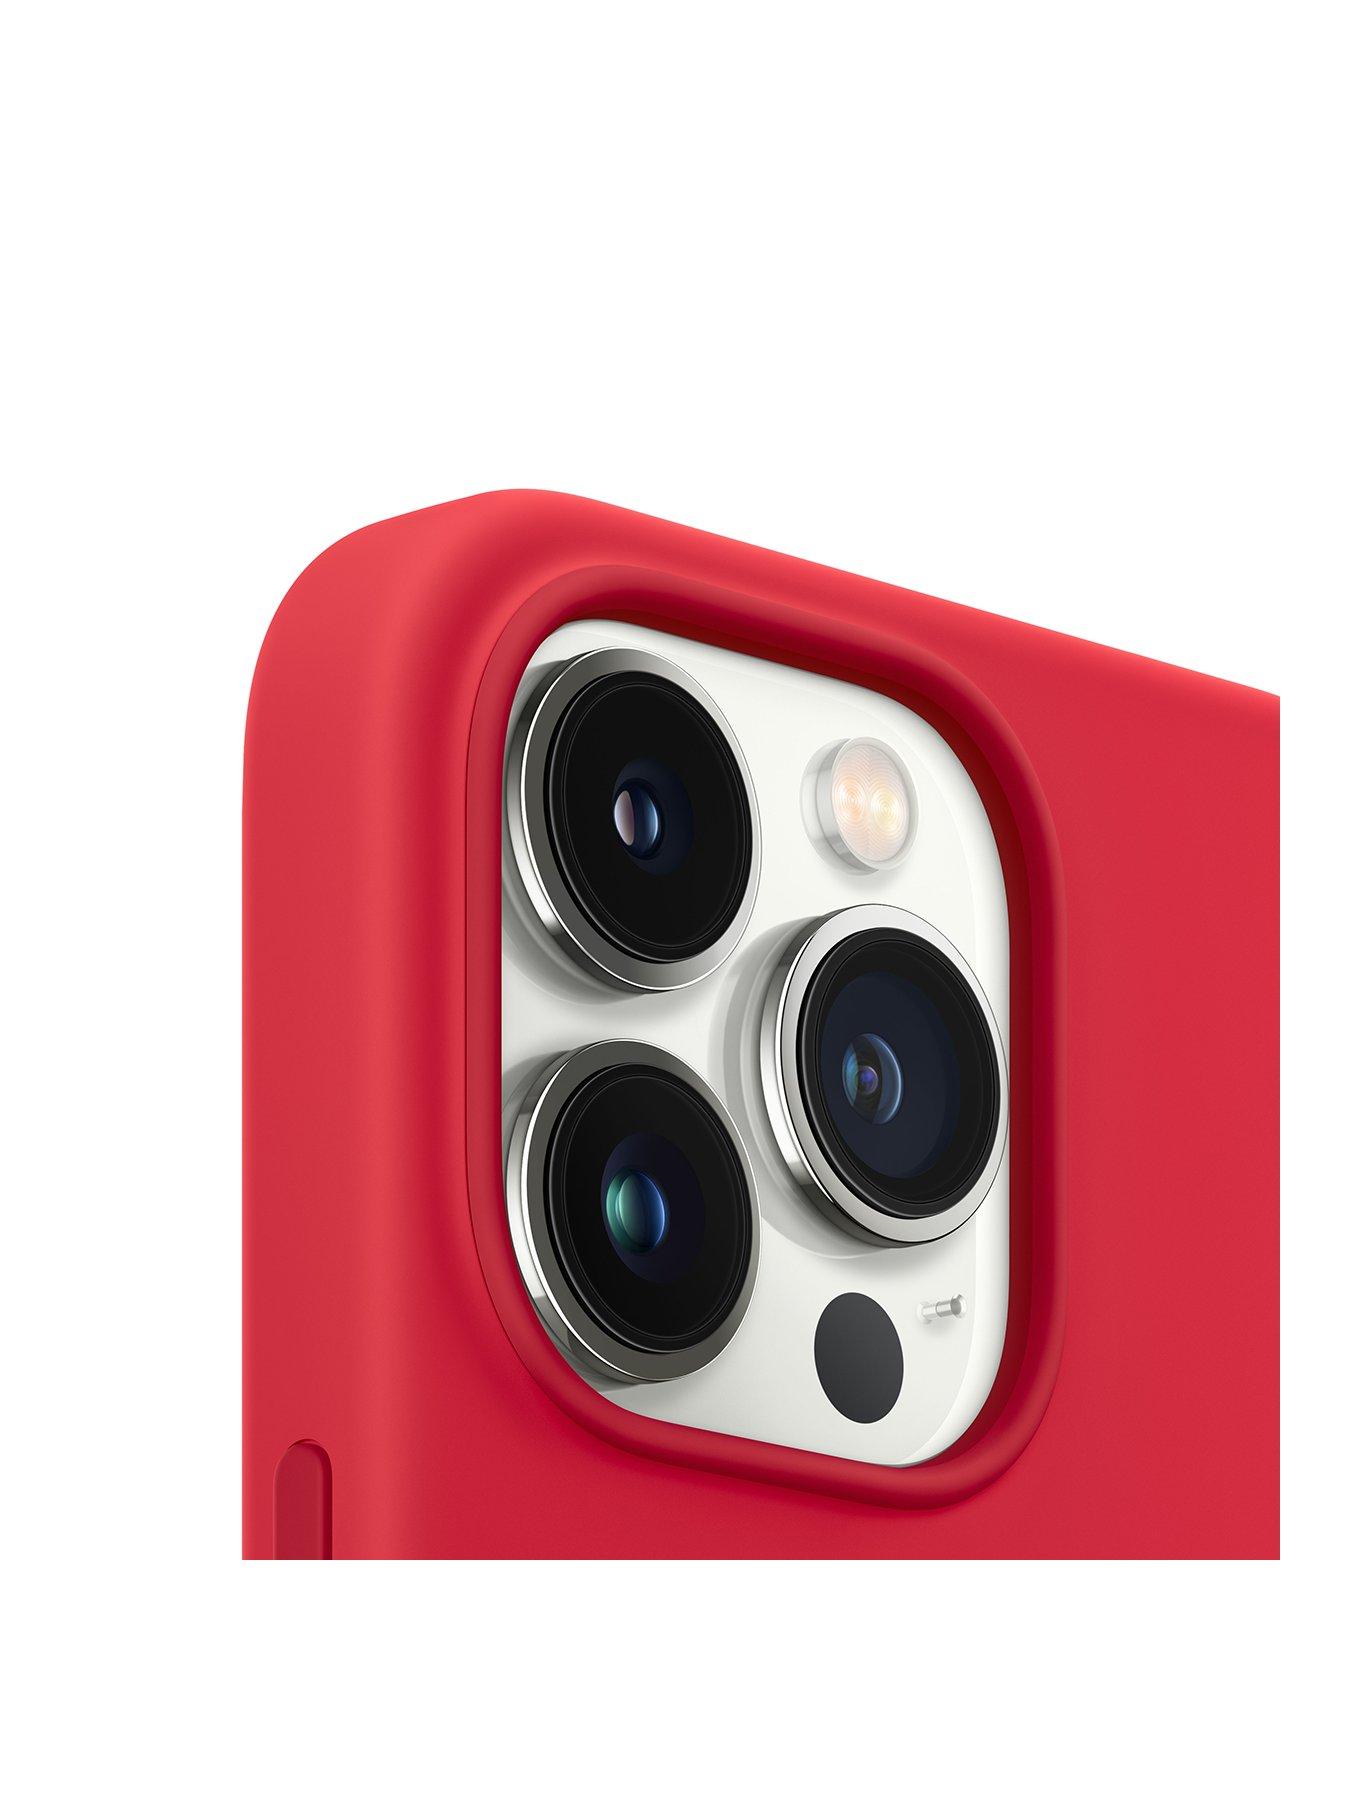 iPhone 13 Pro Max Silicone Case with MagSafe - (PRODUCT)RED - Apple